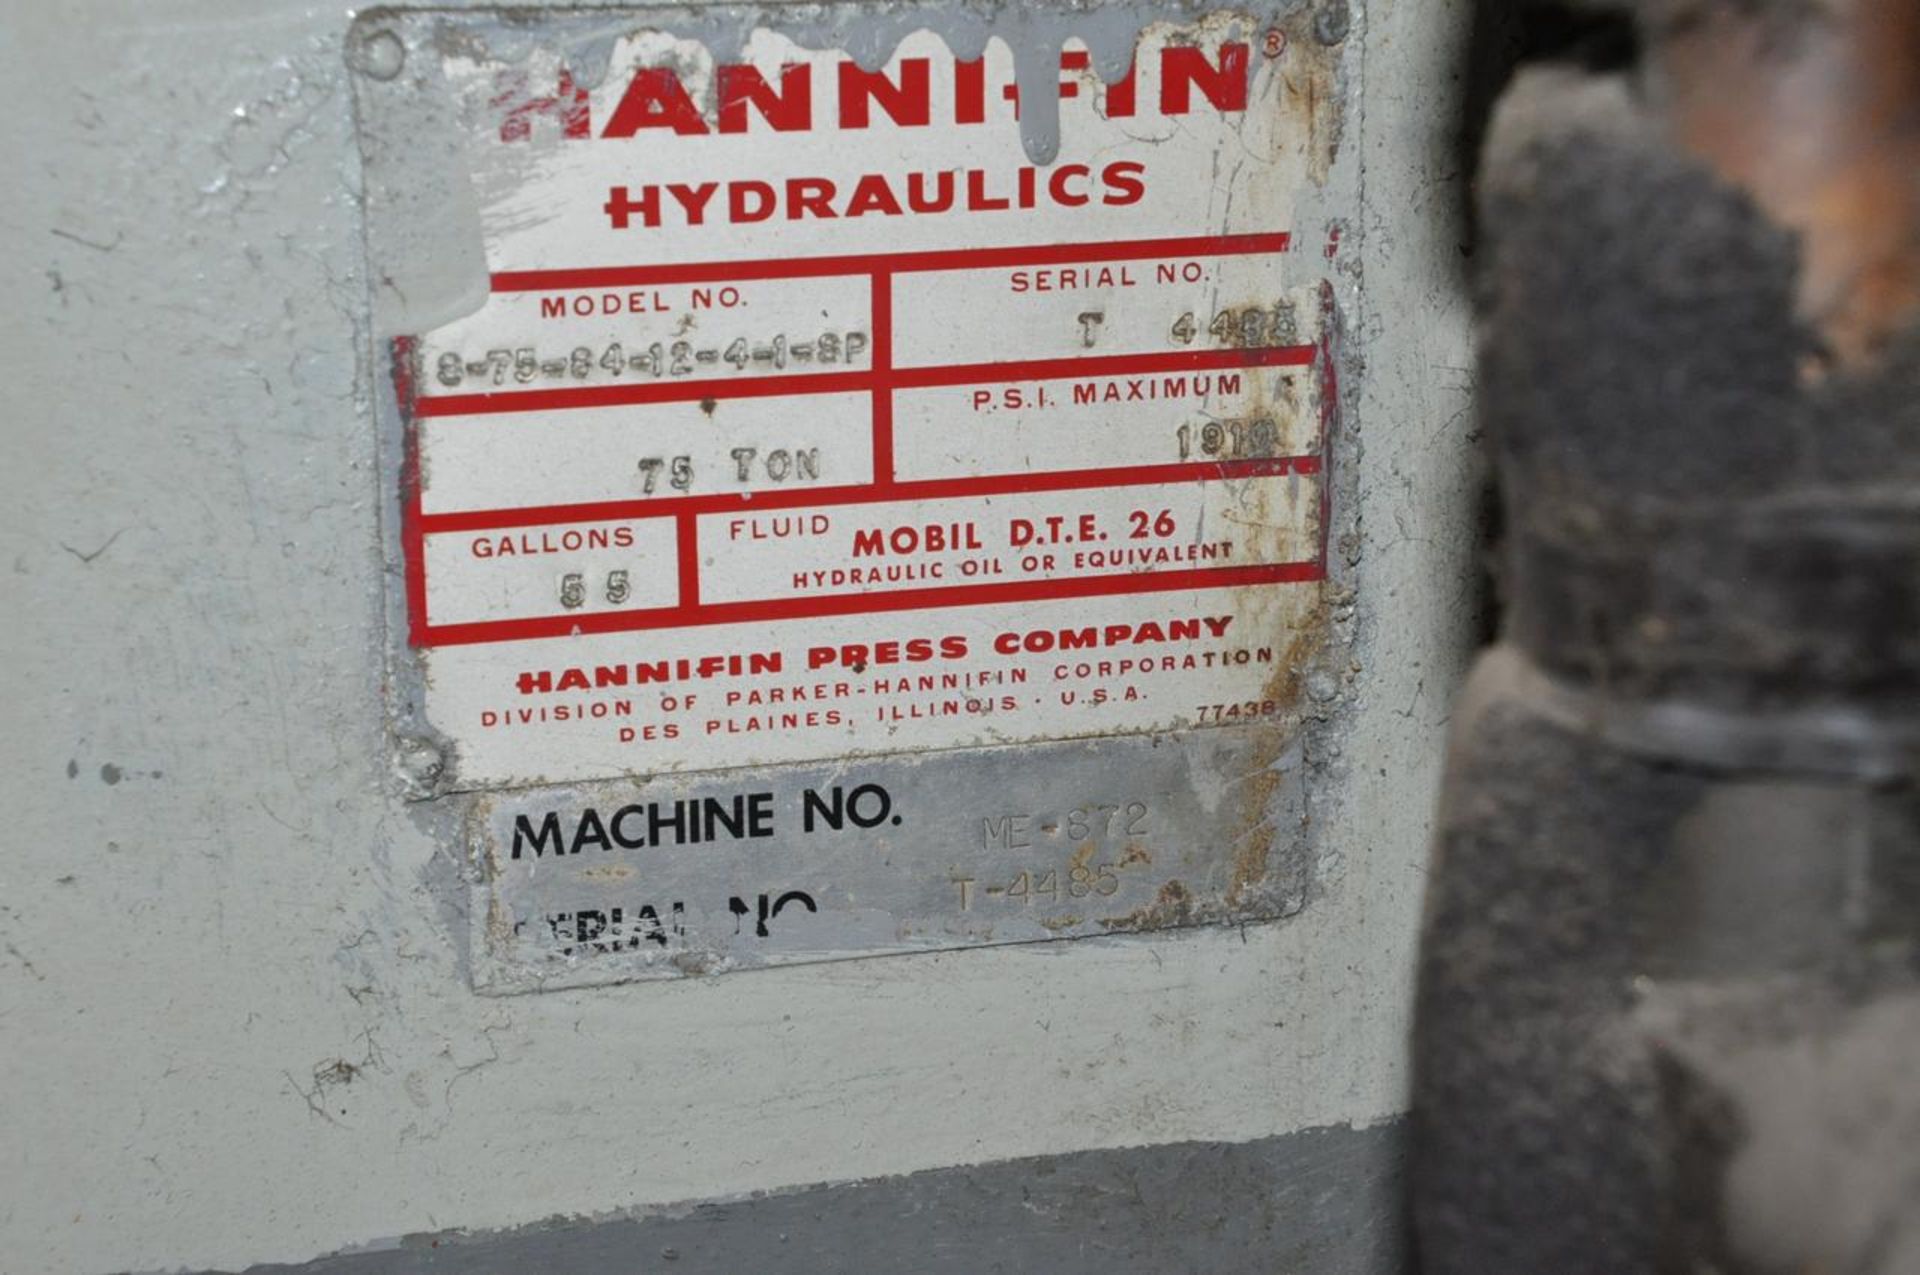 Hannifin S-75-84-12-4-1-SP 75 Ton Hydraulic Straightening Press - Image 4 of 4